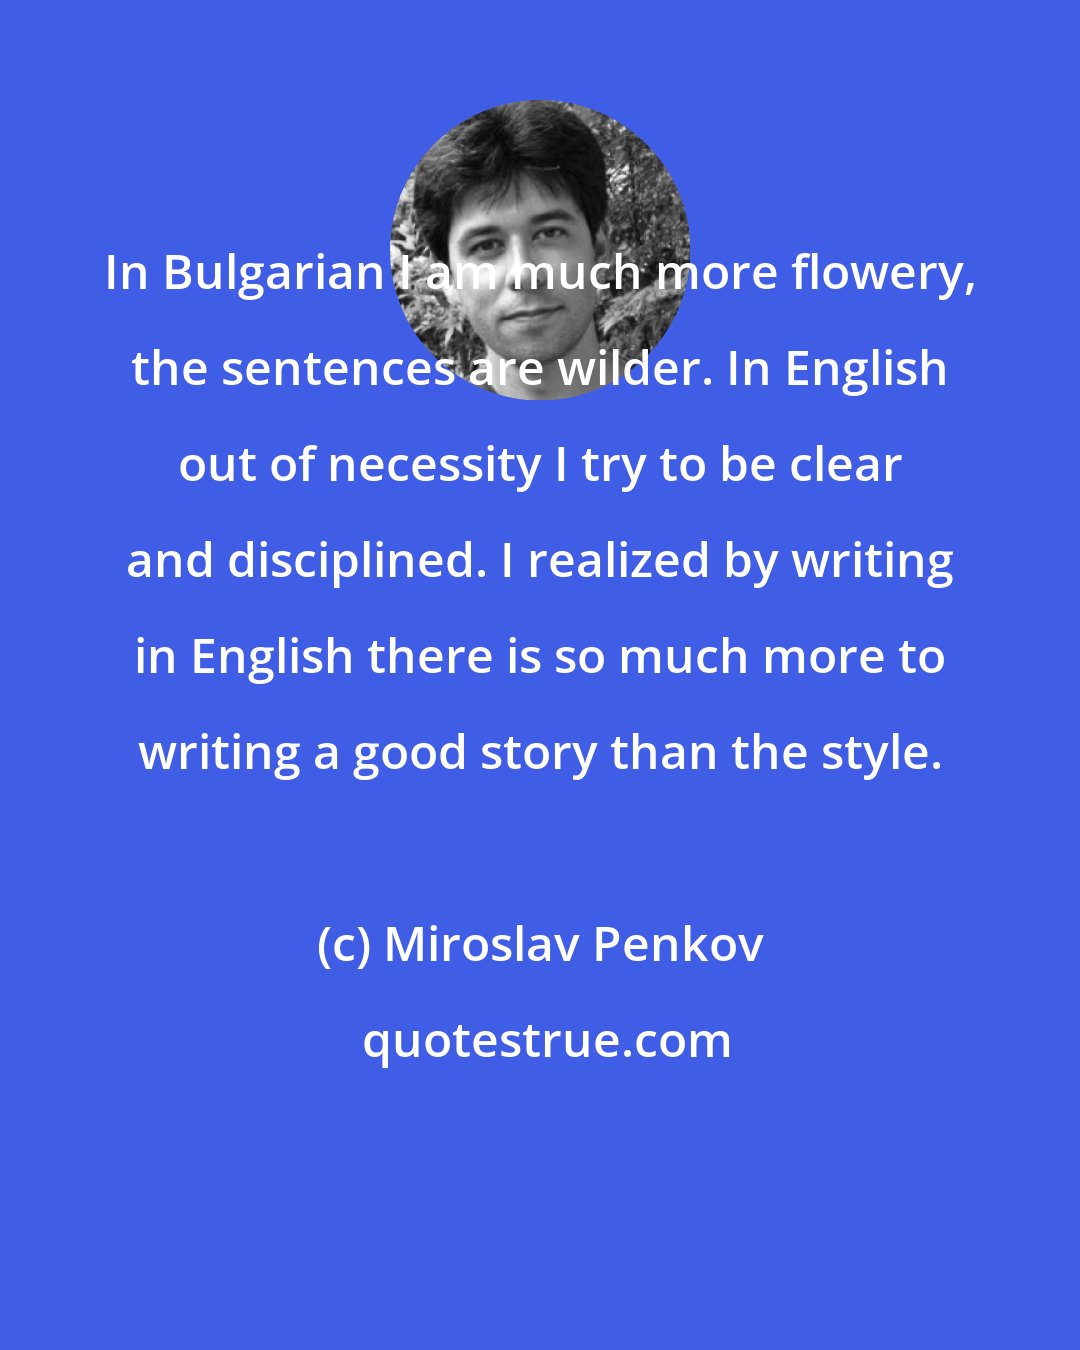 Miroslav Penkov: In Bulgarian I am much more flowery, the sentences are wilder. In English out of necessity I try to be clear and disciplined. I realized by writing in English there is so much more to writing a good story than the style.